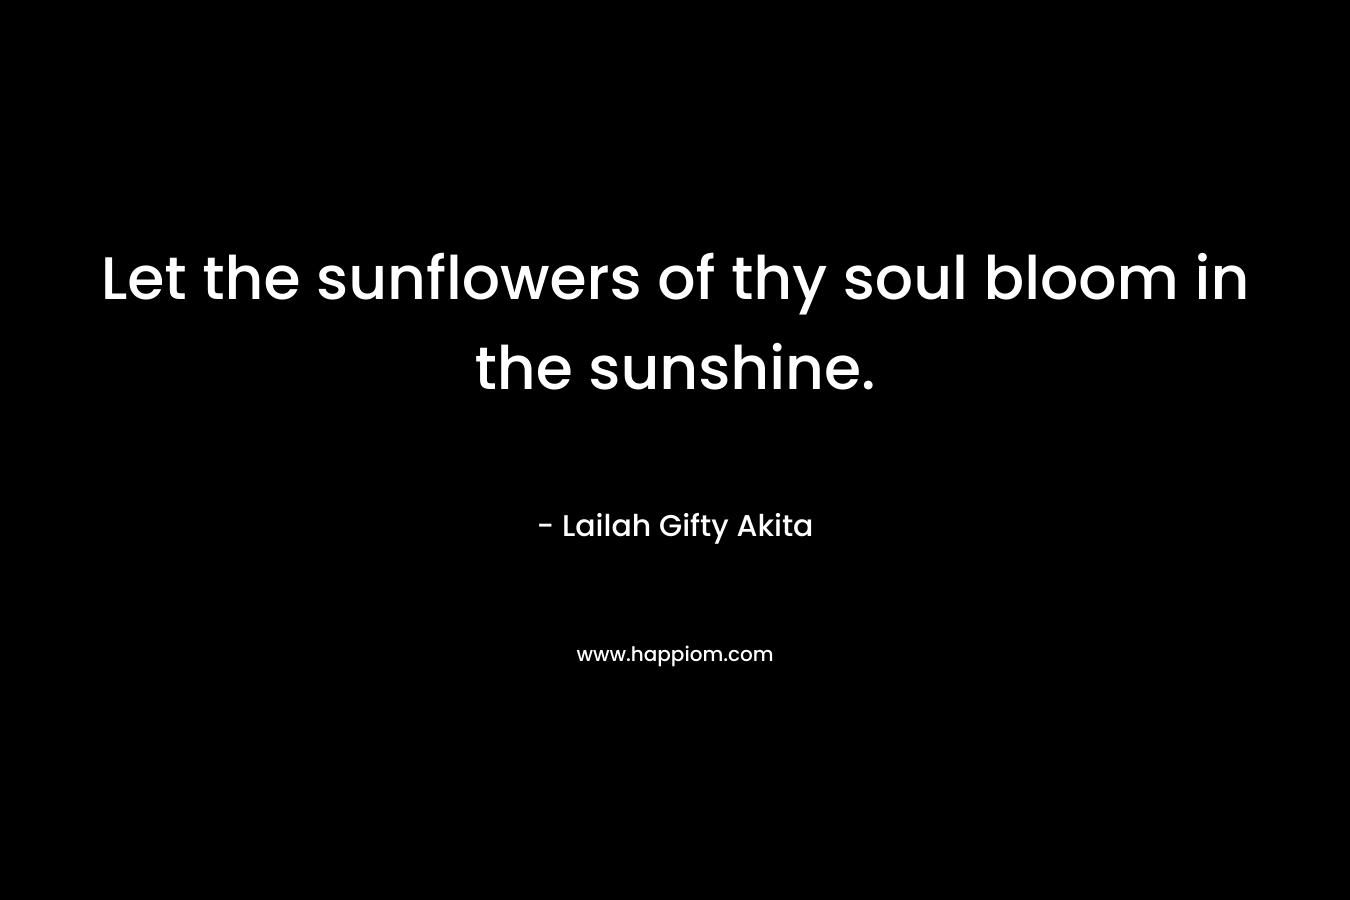 Let the sunflowers of thy soul bloom in the sunshine.